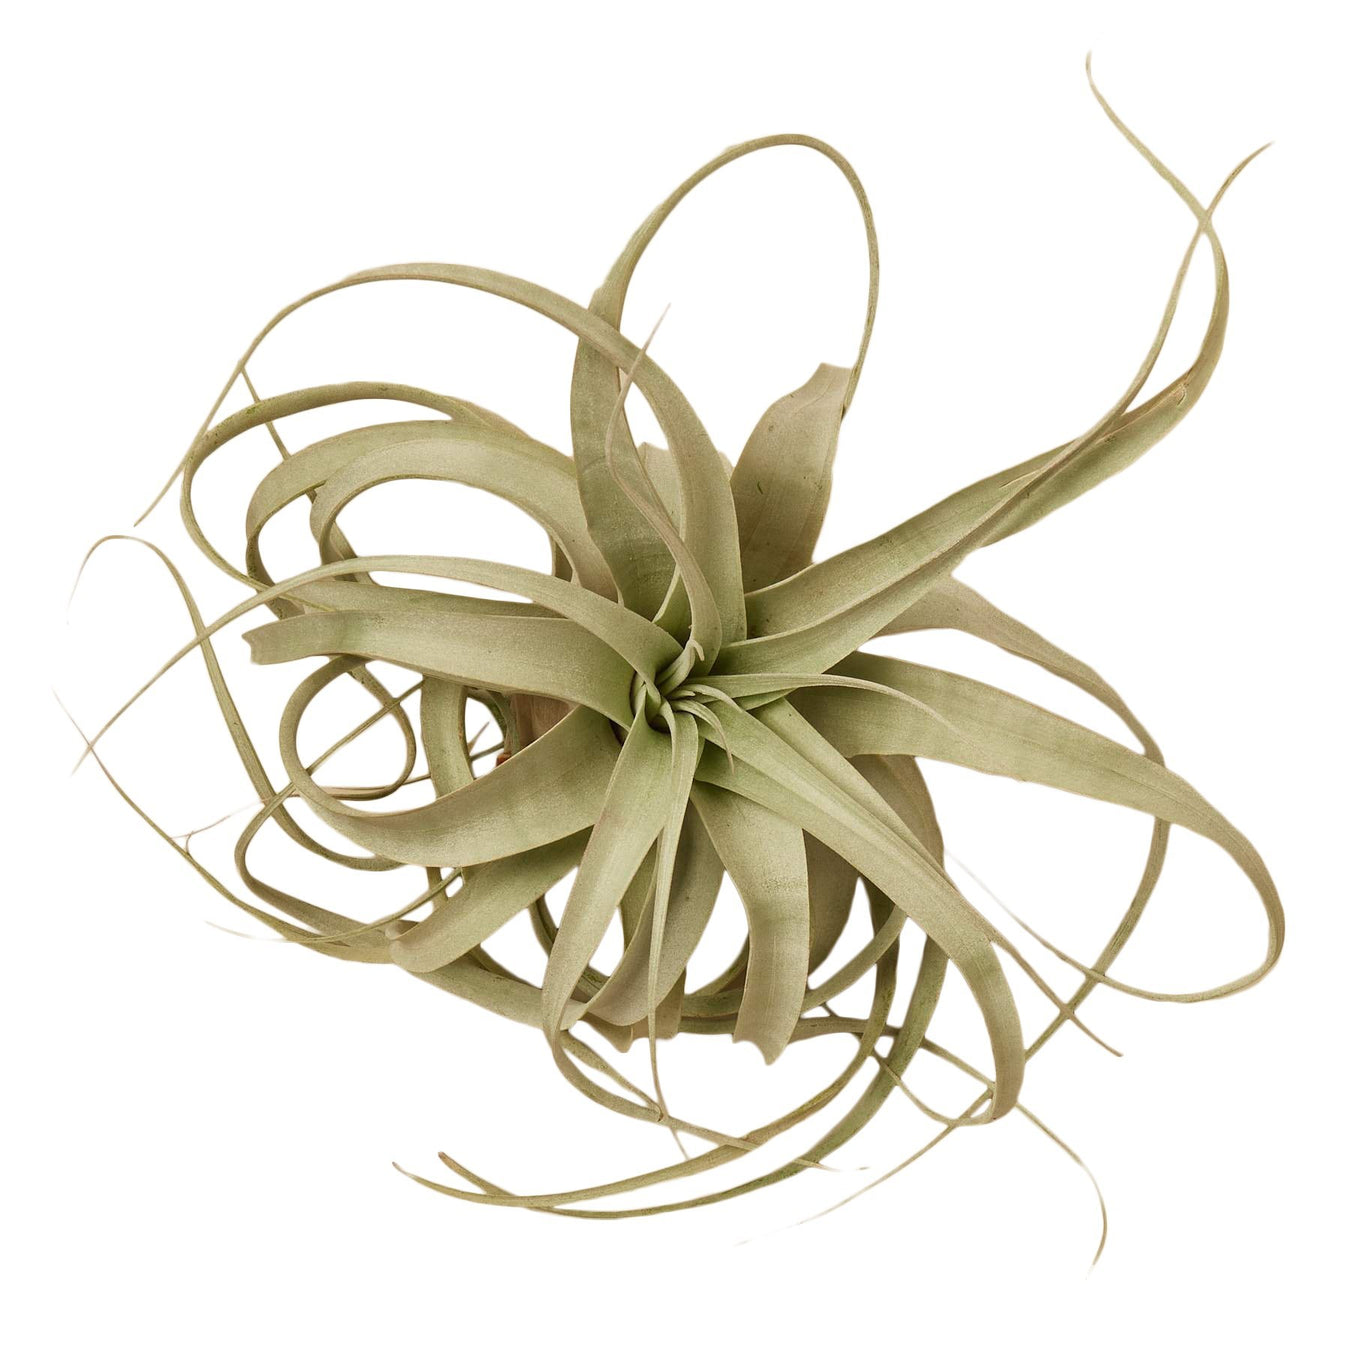 Air Plant Collection